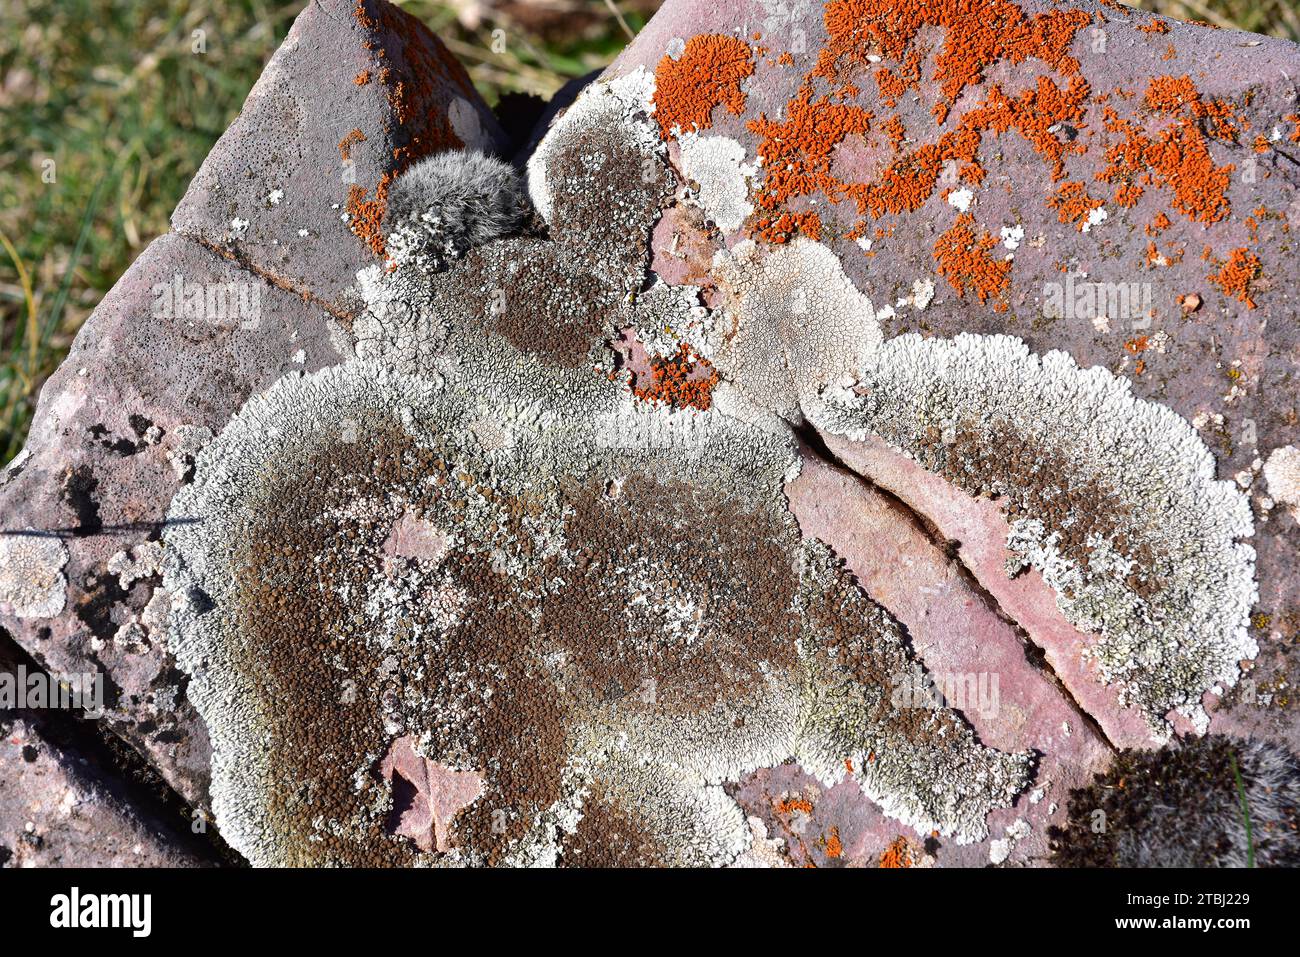 Lecanora muralis or Protoparmeliopsis muralis is a crustose lichen that grows on calcareous or siliceous rocks. At up right Xanthoria elegans. This ph Stock Photo